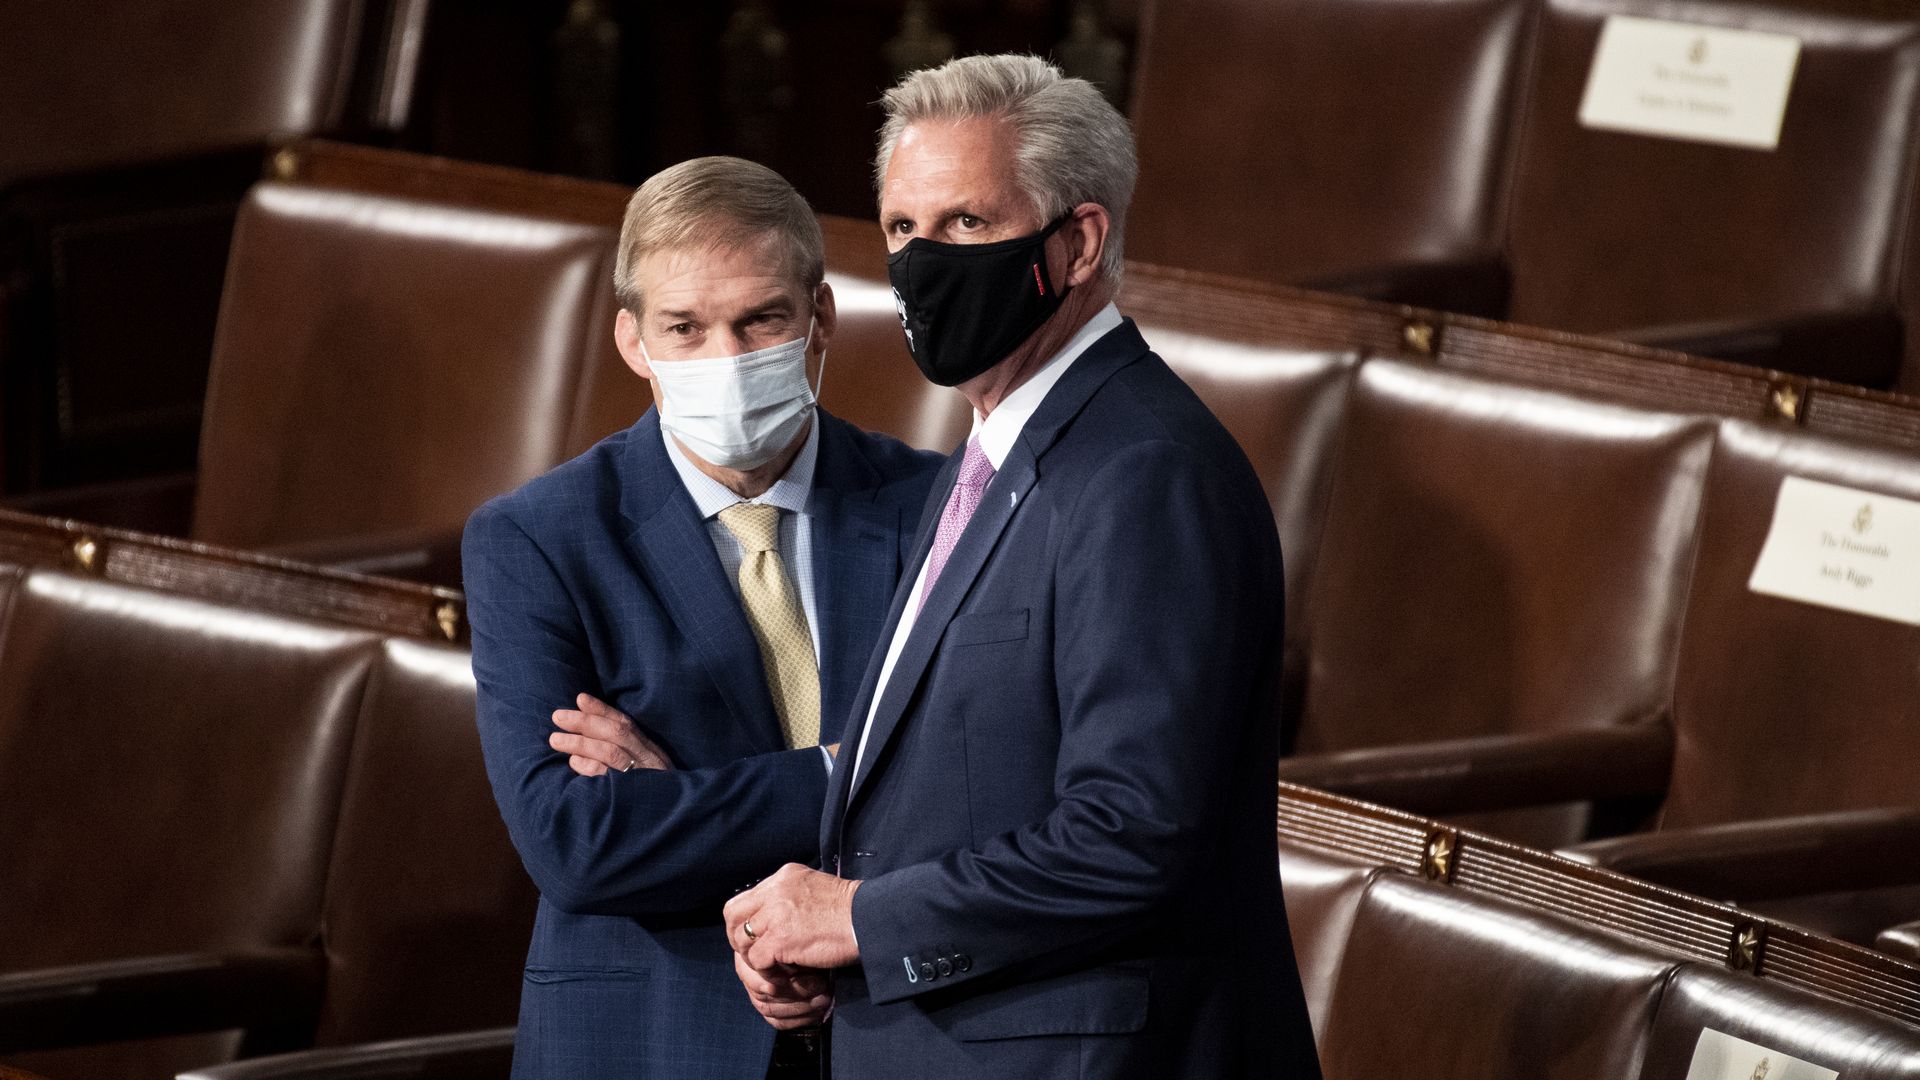 Reps. Jim Jordan and Kevin McCarthy stand in the House chamber wearing masks.